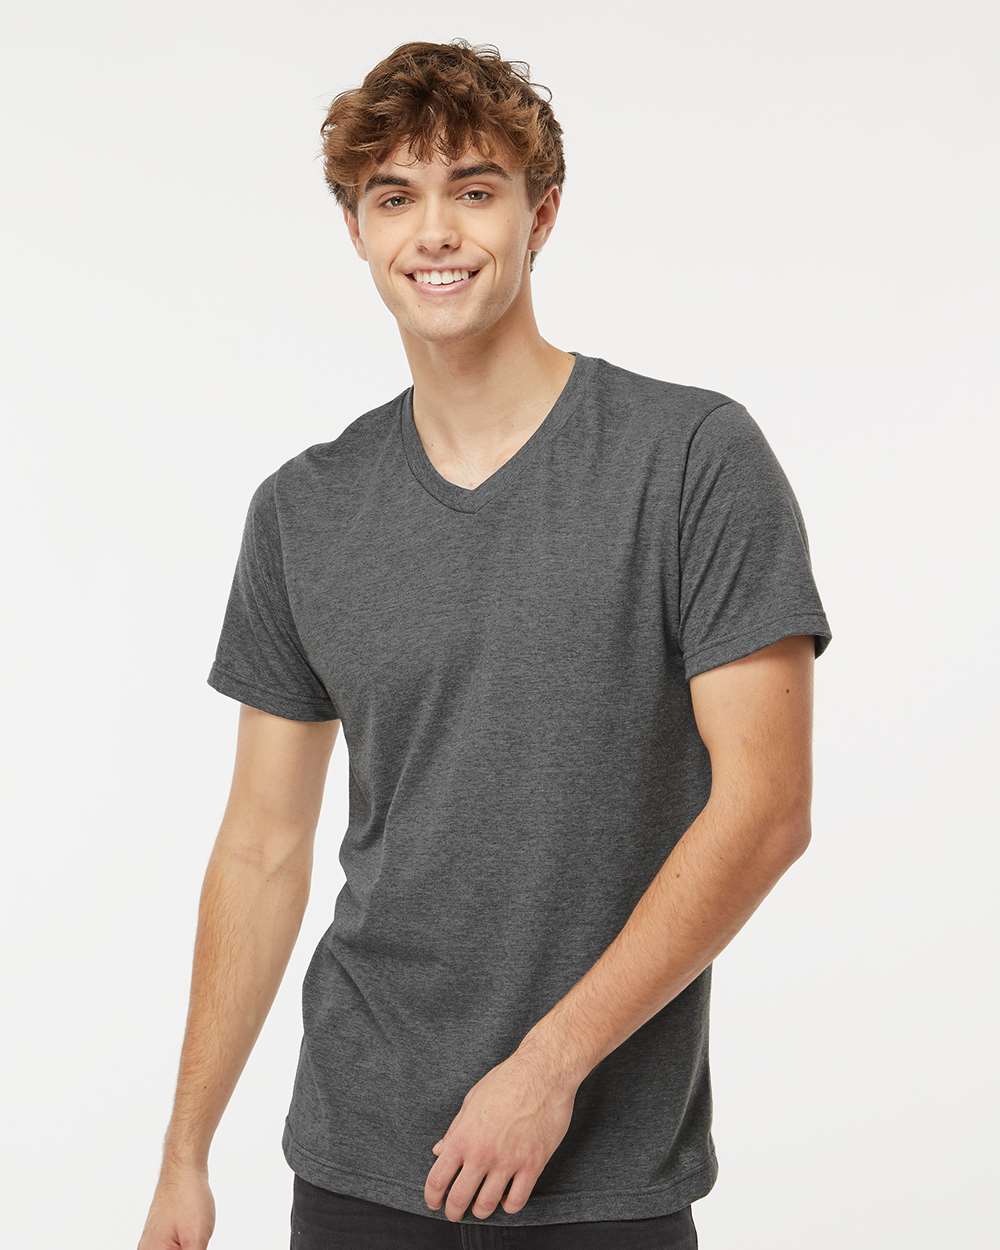 M&O Deluxe Blend V-Neck T-Shirt 3543 #colormdl_Heather Charcoal